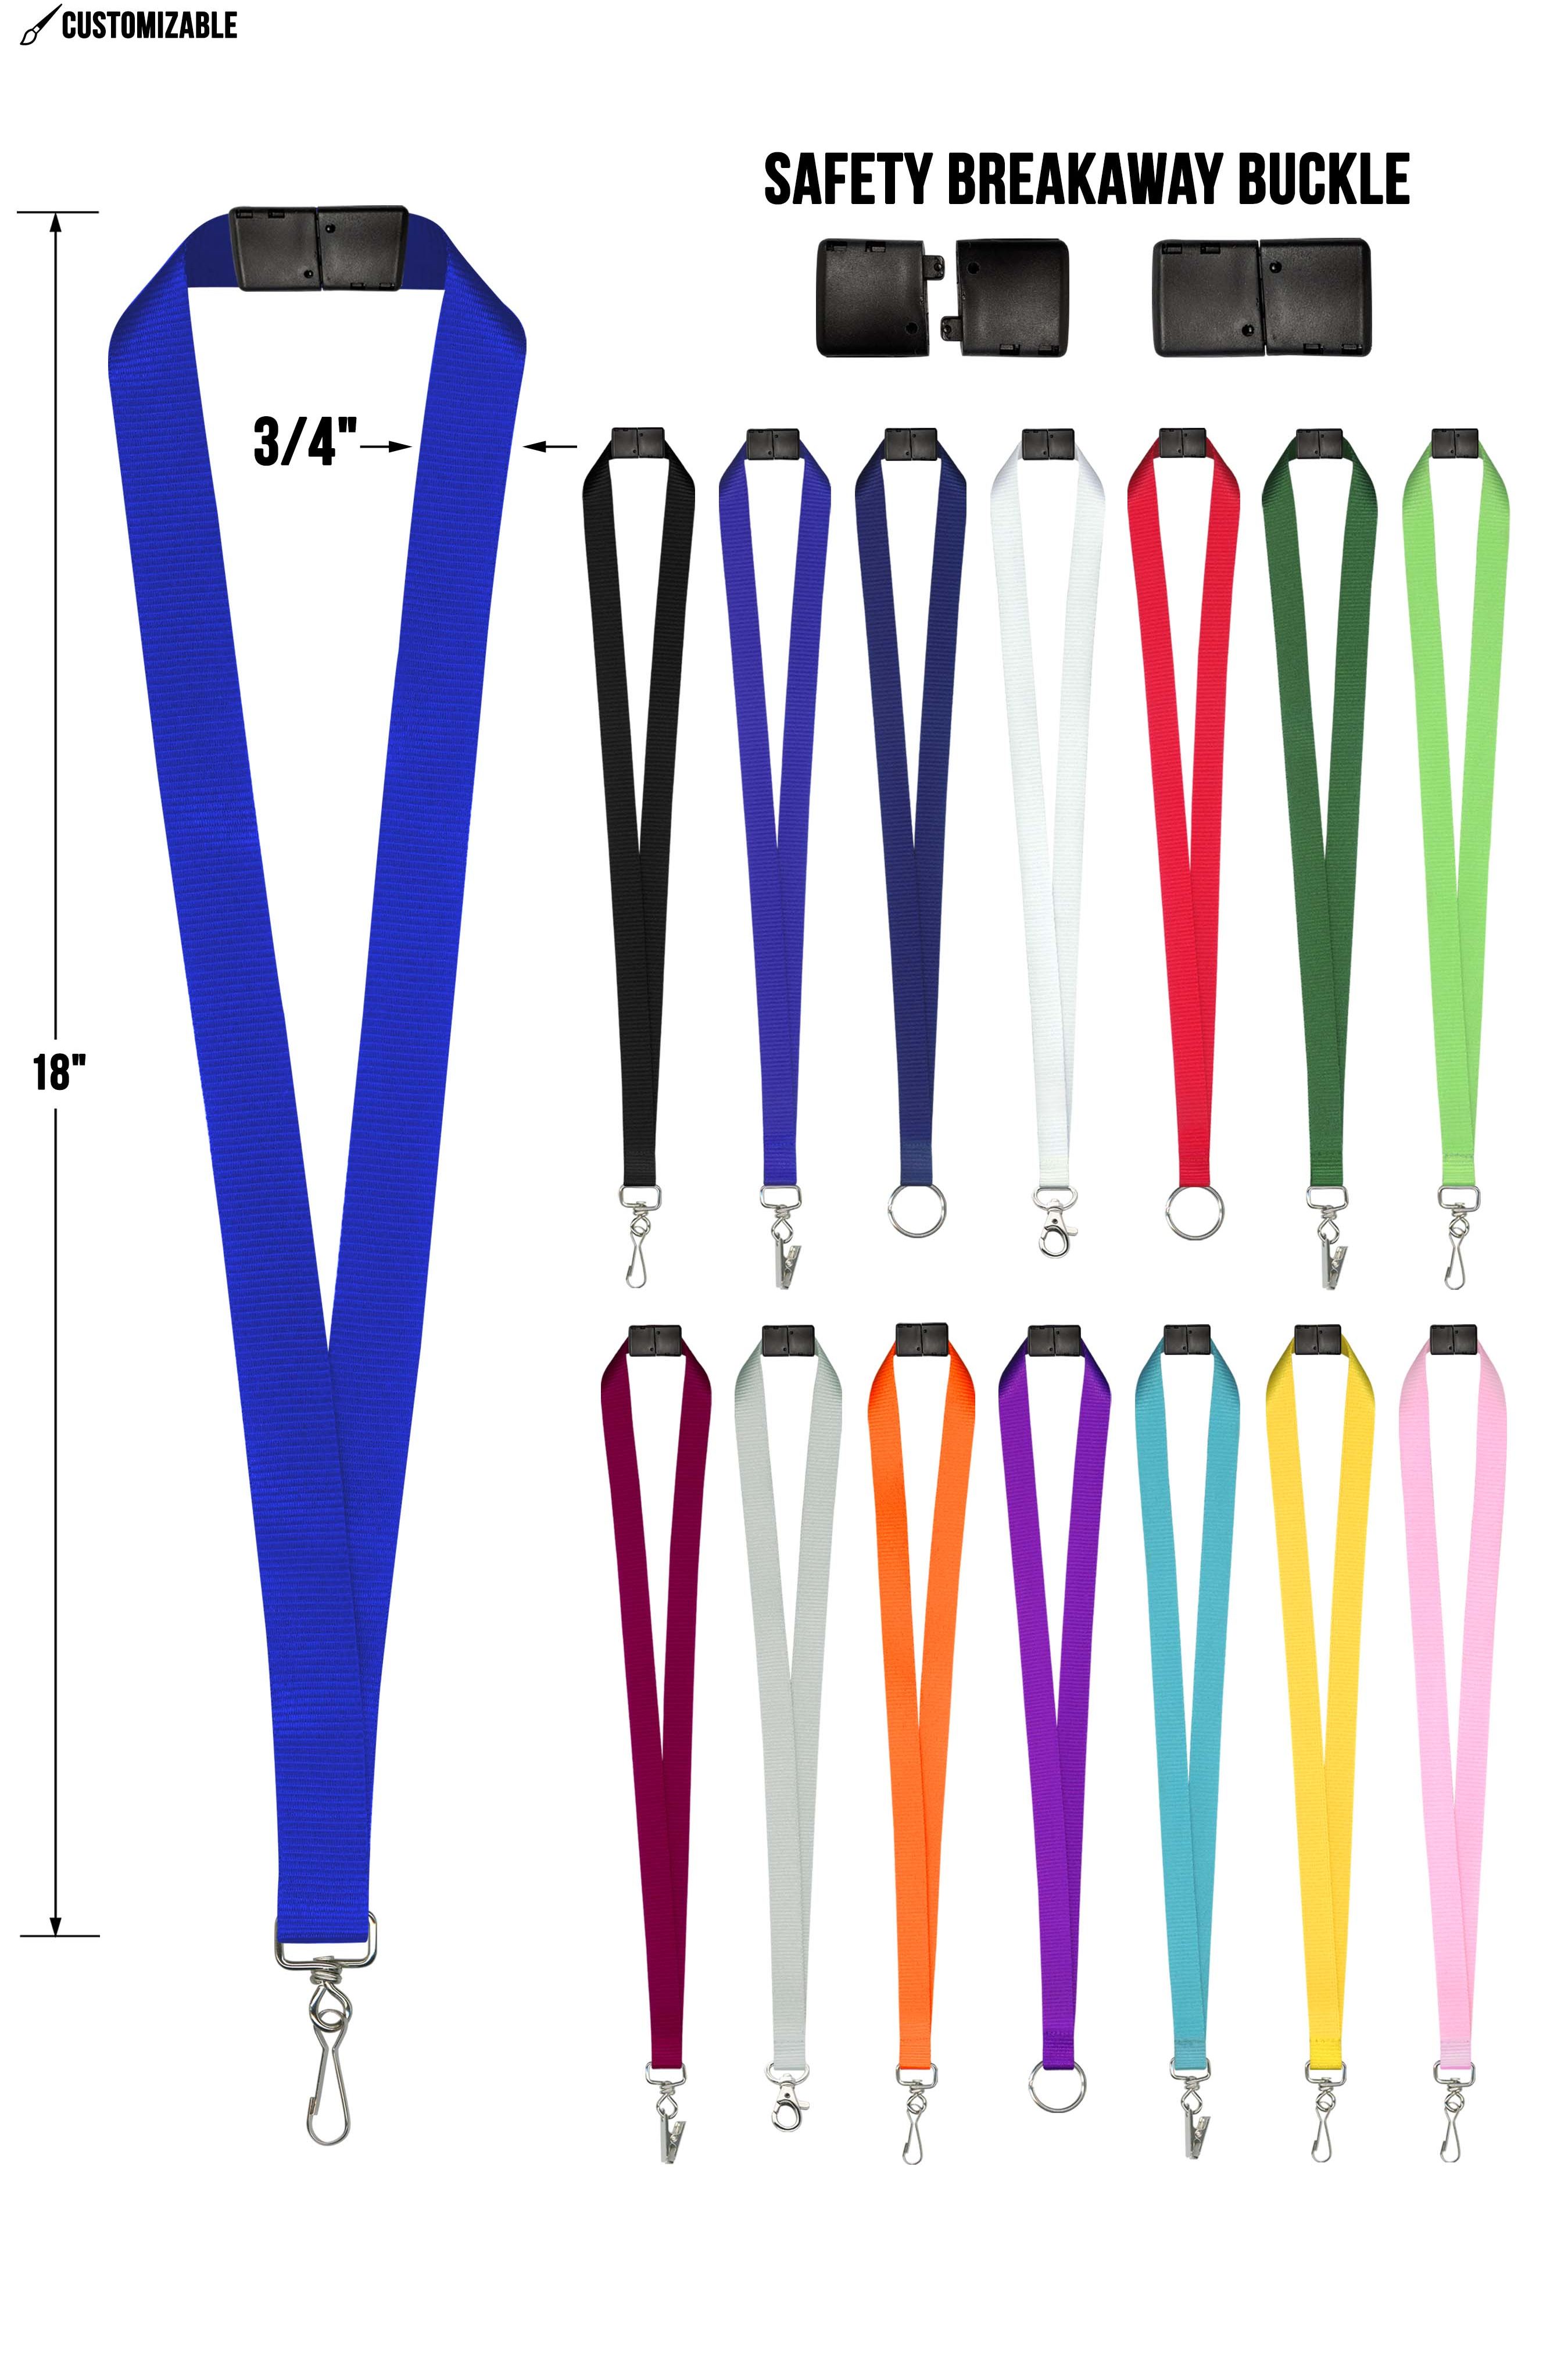 Customizable 3/4" Safety Breakaway Lanyard - Ideal for Companies, Events & Conventions - 14 Colors & 4 Hardware Choices